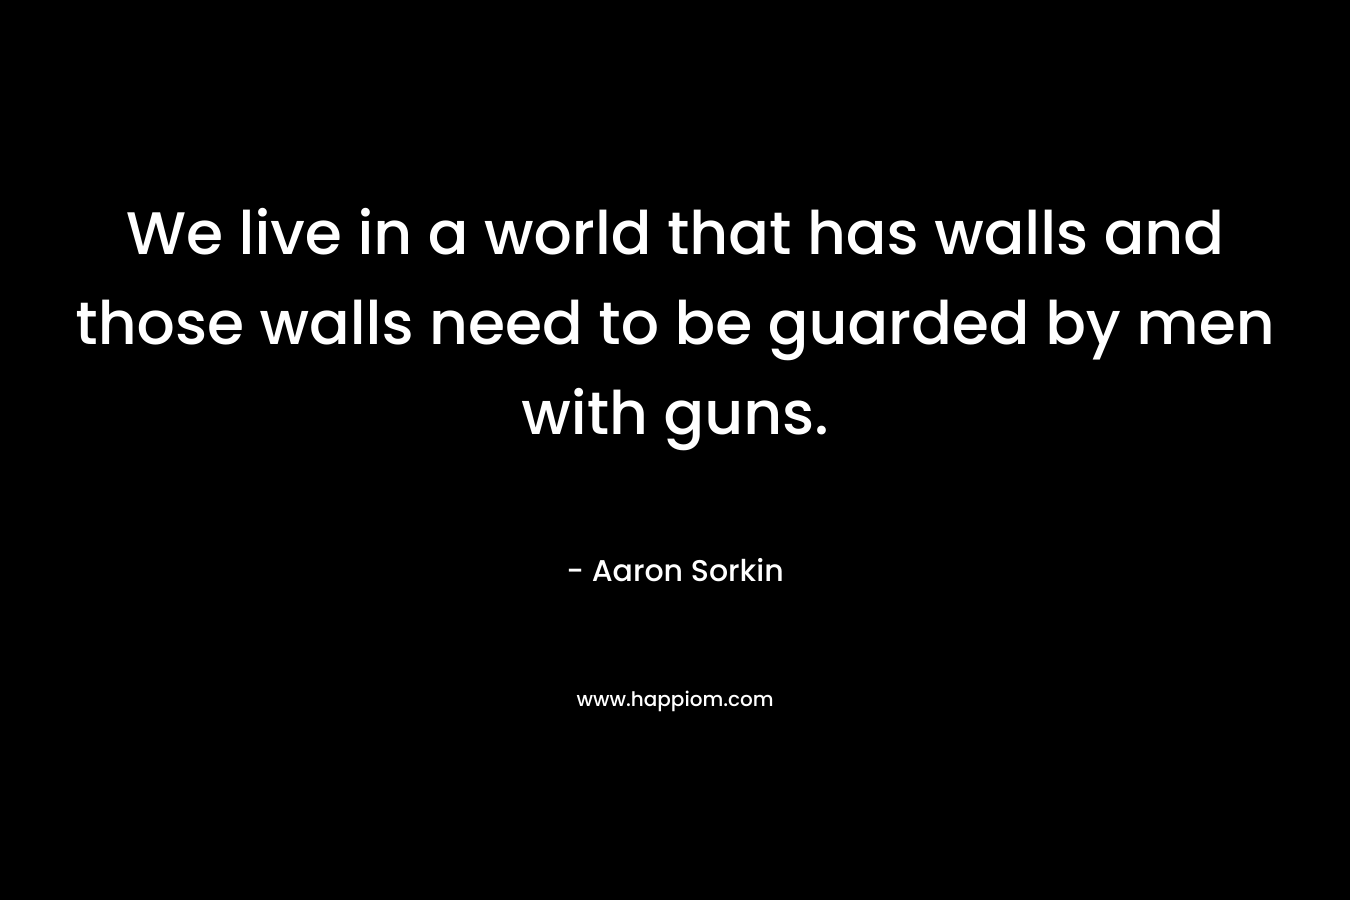 We live in a world that has walls and those walls need to be guarded by men with guns. – Aaron Sorkin